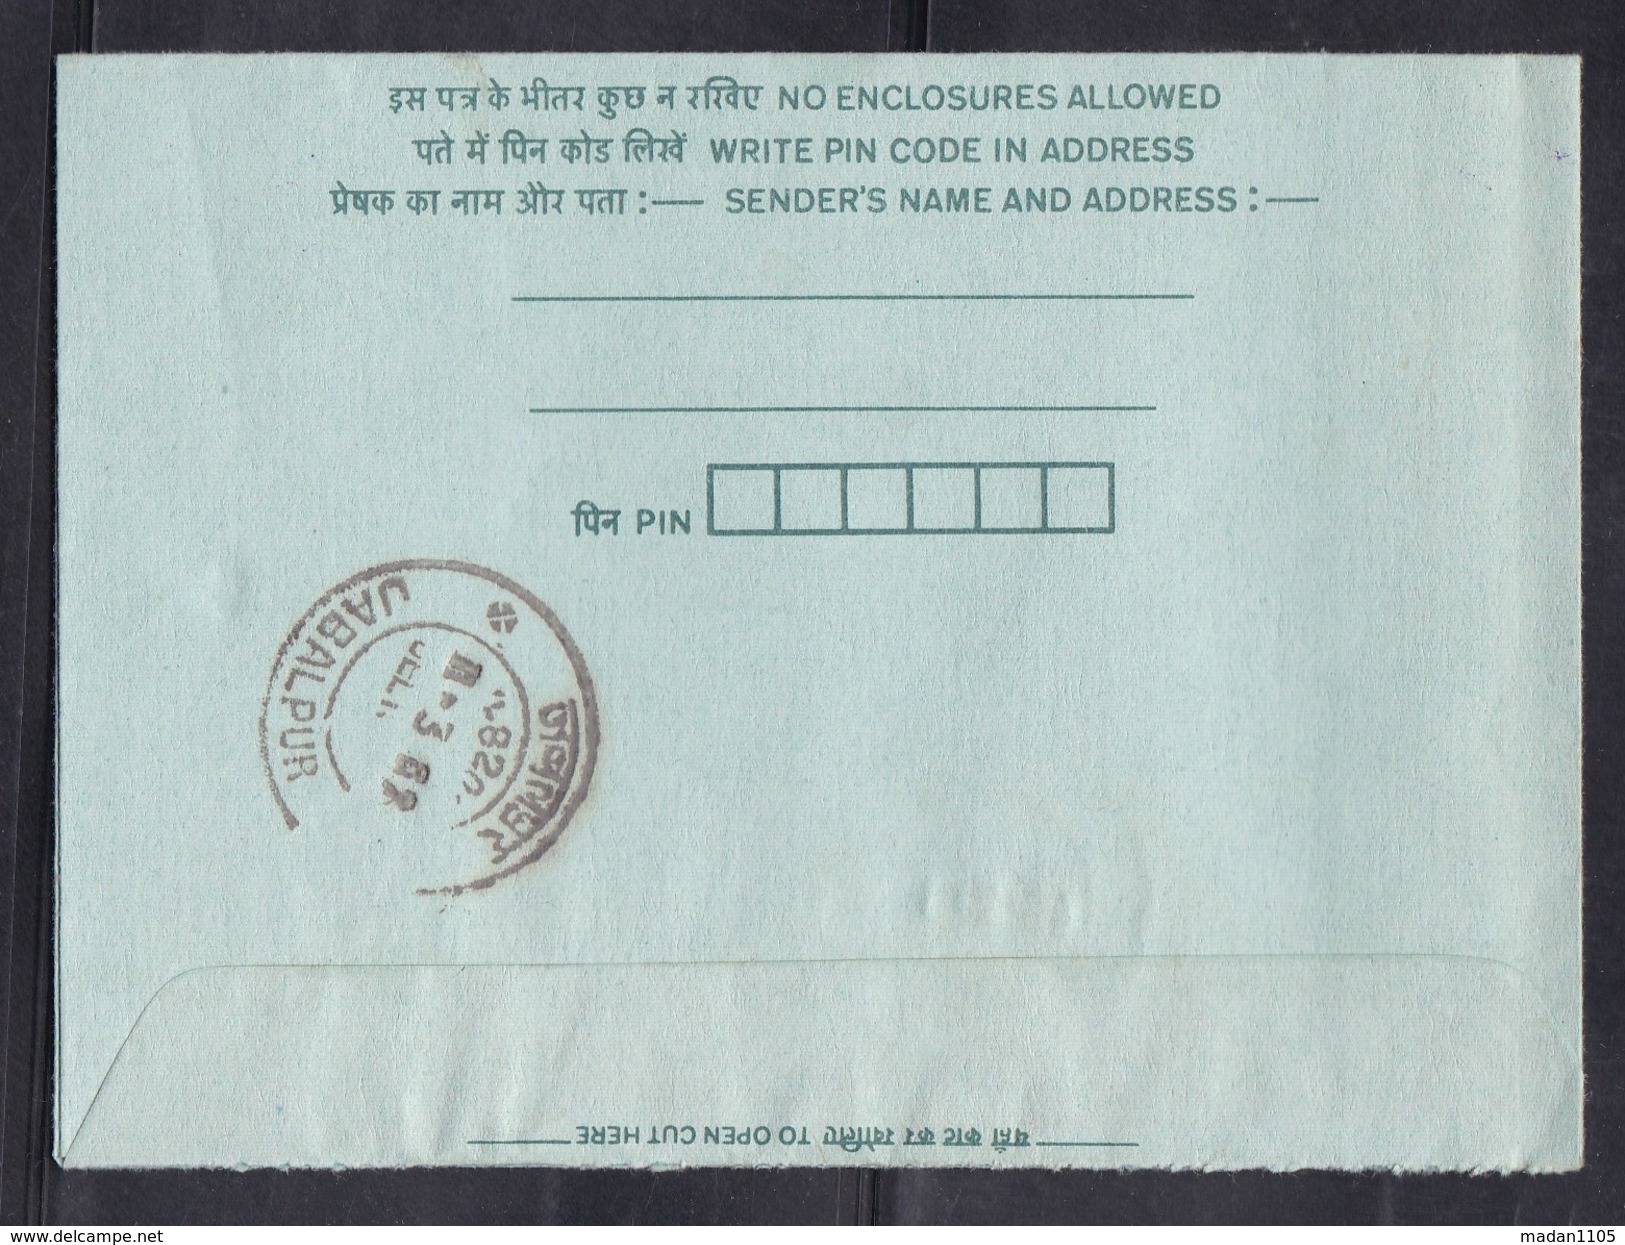 INDIA, 1989,  INLAND LETTER, Indian Peace Keeping Force To India From FPO 882, Unit Censor Stamp S-465,   (item No 19) - Covers & Documents